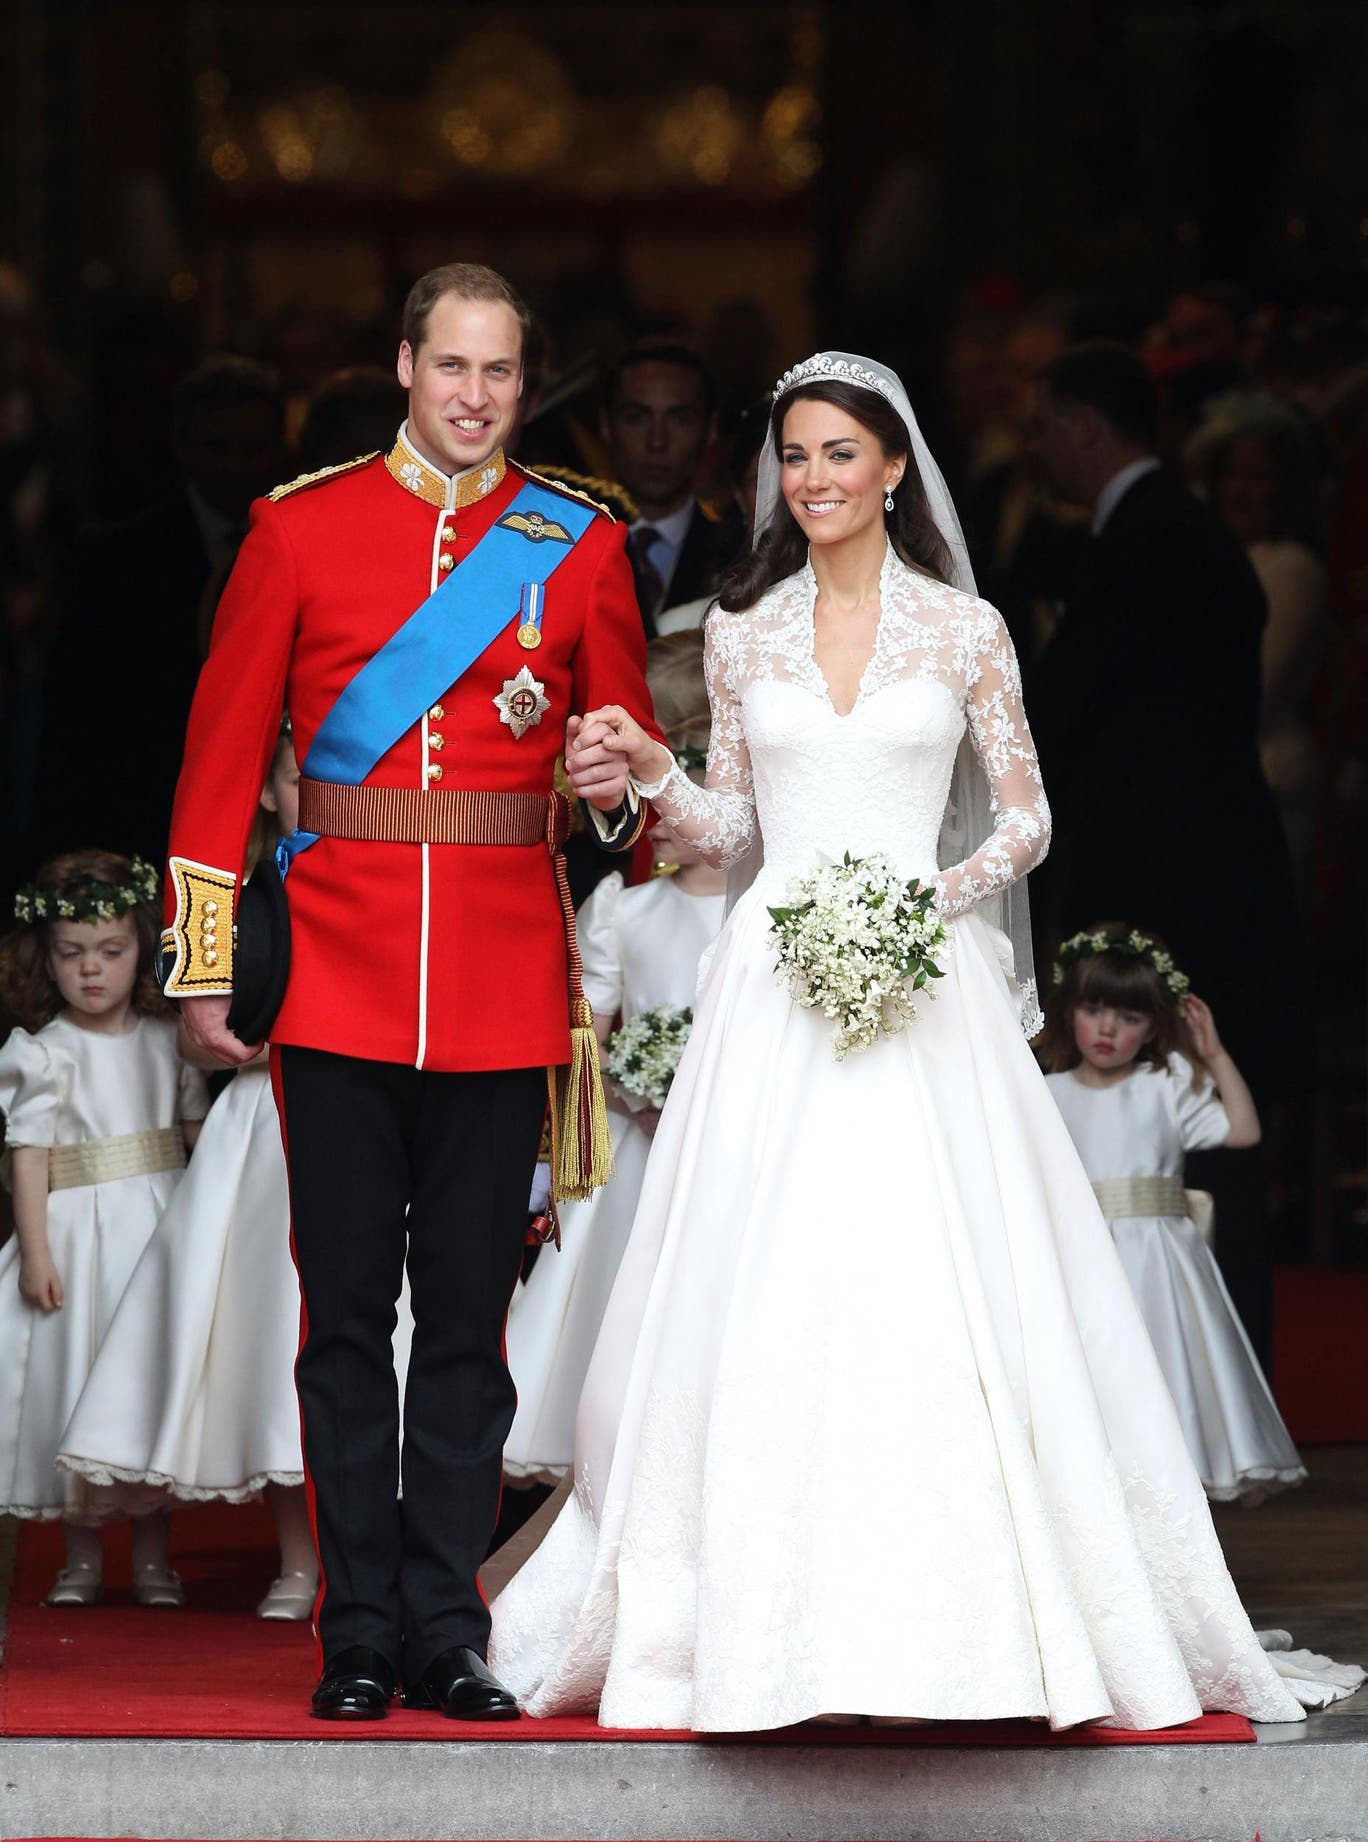 Kate and William’s wedding